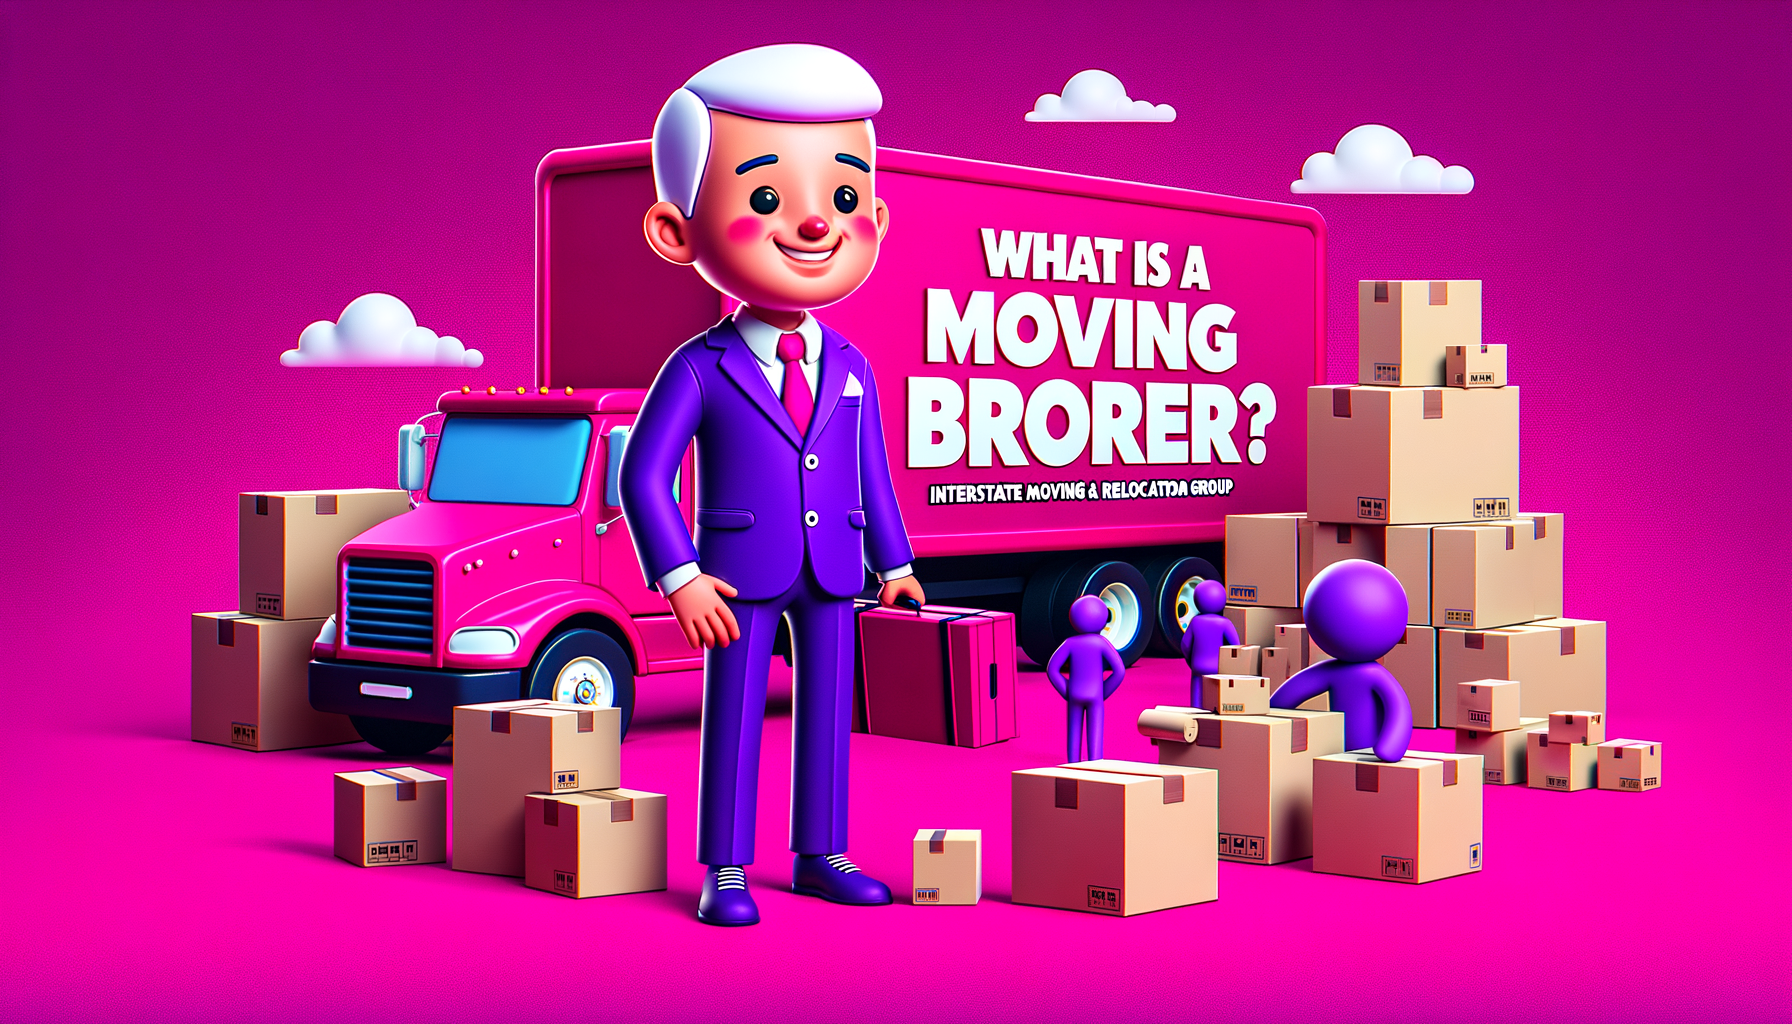 A vibrant, cartoon-like, fuschia-colored image featuring a friendly moving broker character surrounded by various moving boxes and a moving truck, illustrating the concept of a moving broker in a fun and engaging way.